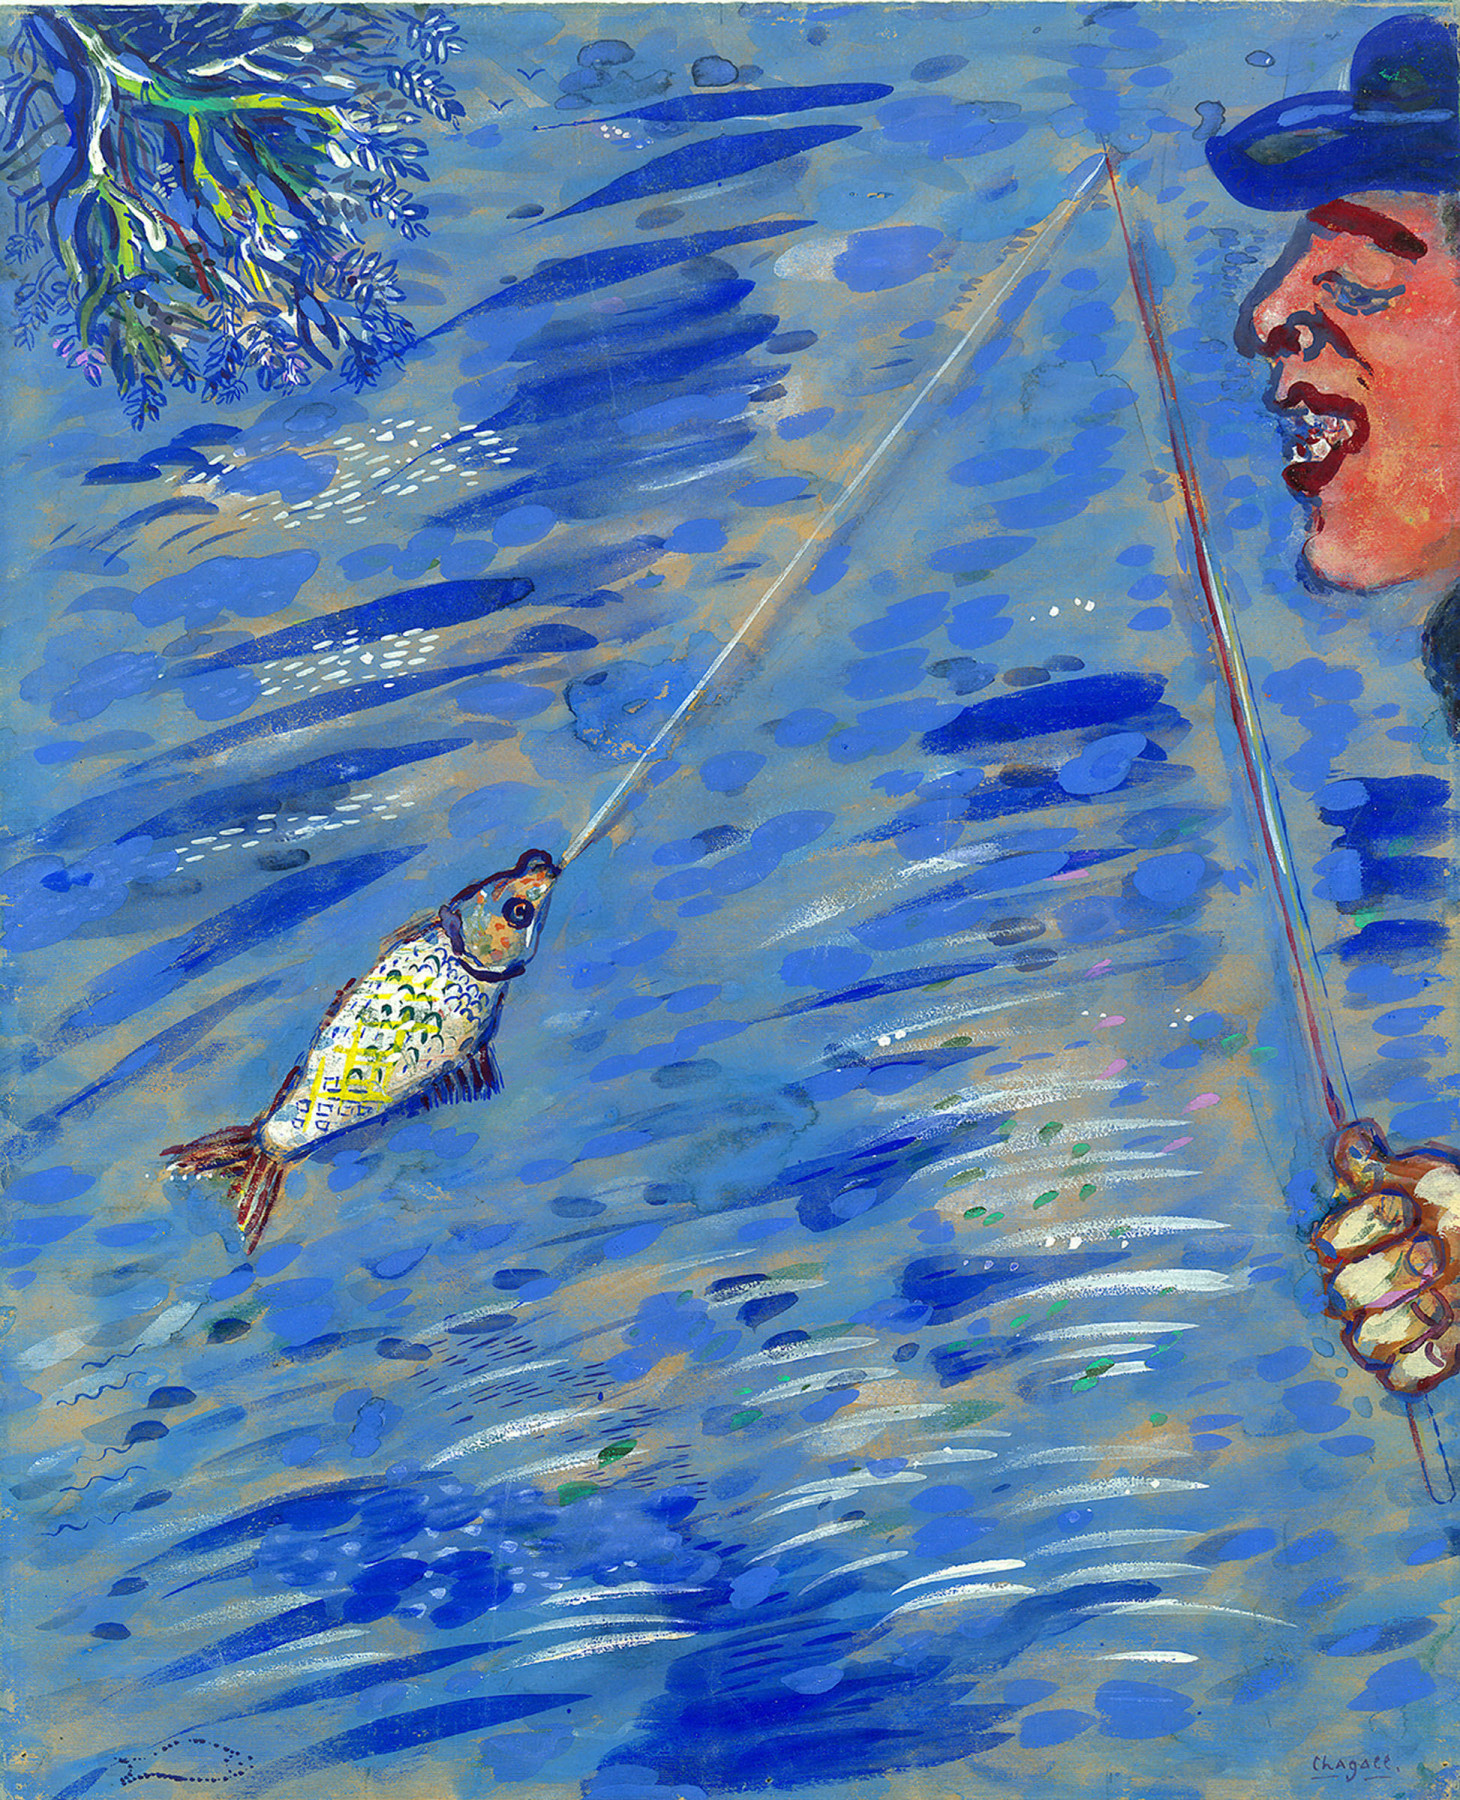 Chagall - The Little Fish and the Fisherman